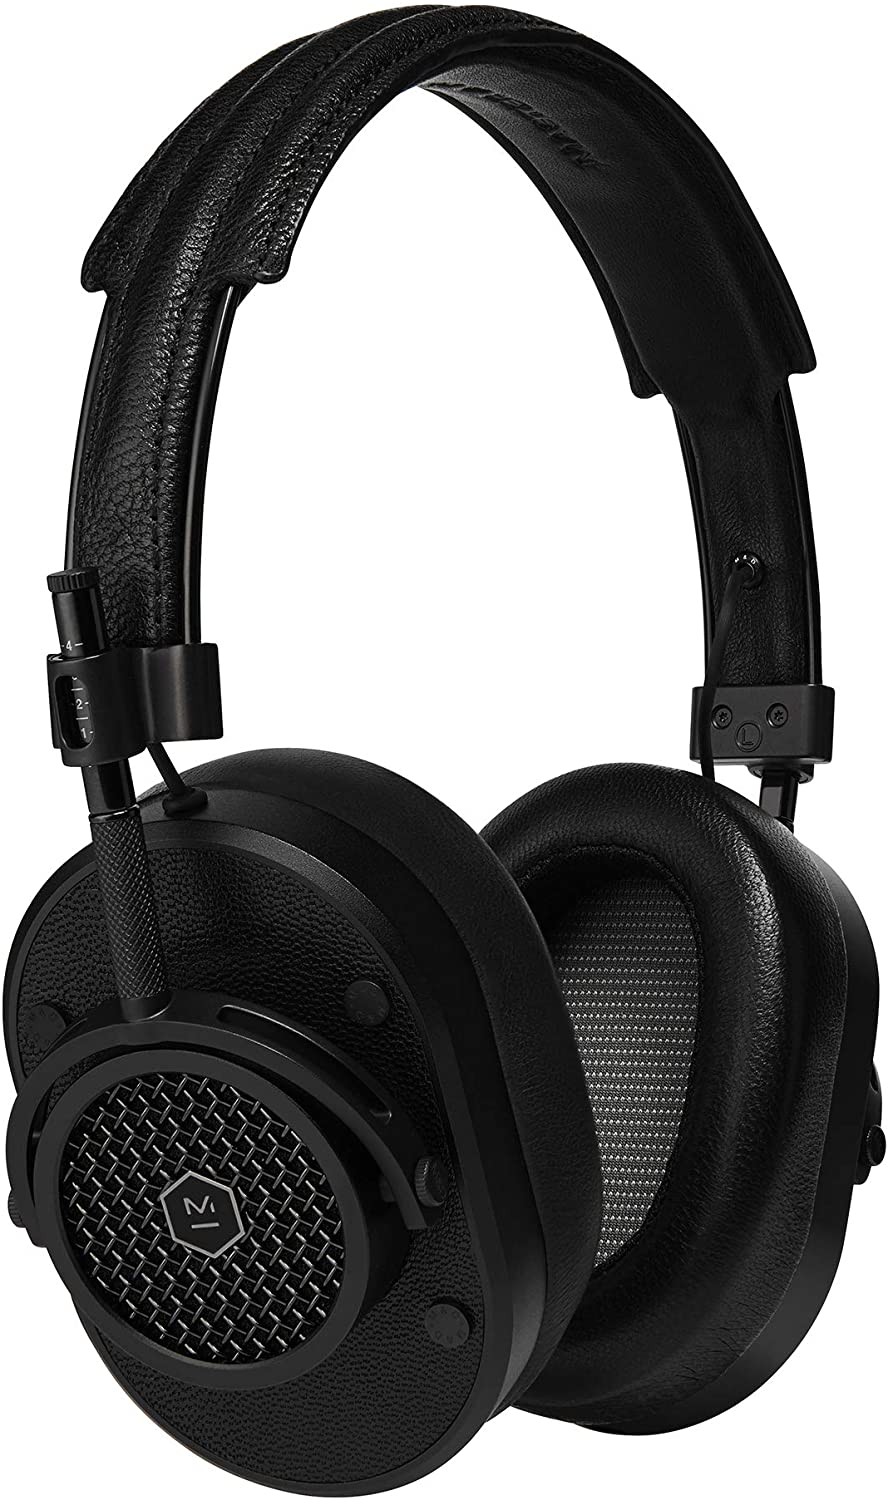 Master & Dynamic MH40B1 Over-Ear Headphones with Wire, Black - image 1 of 5